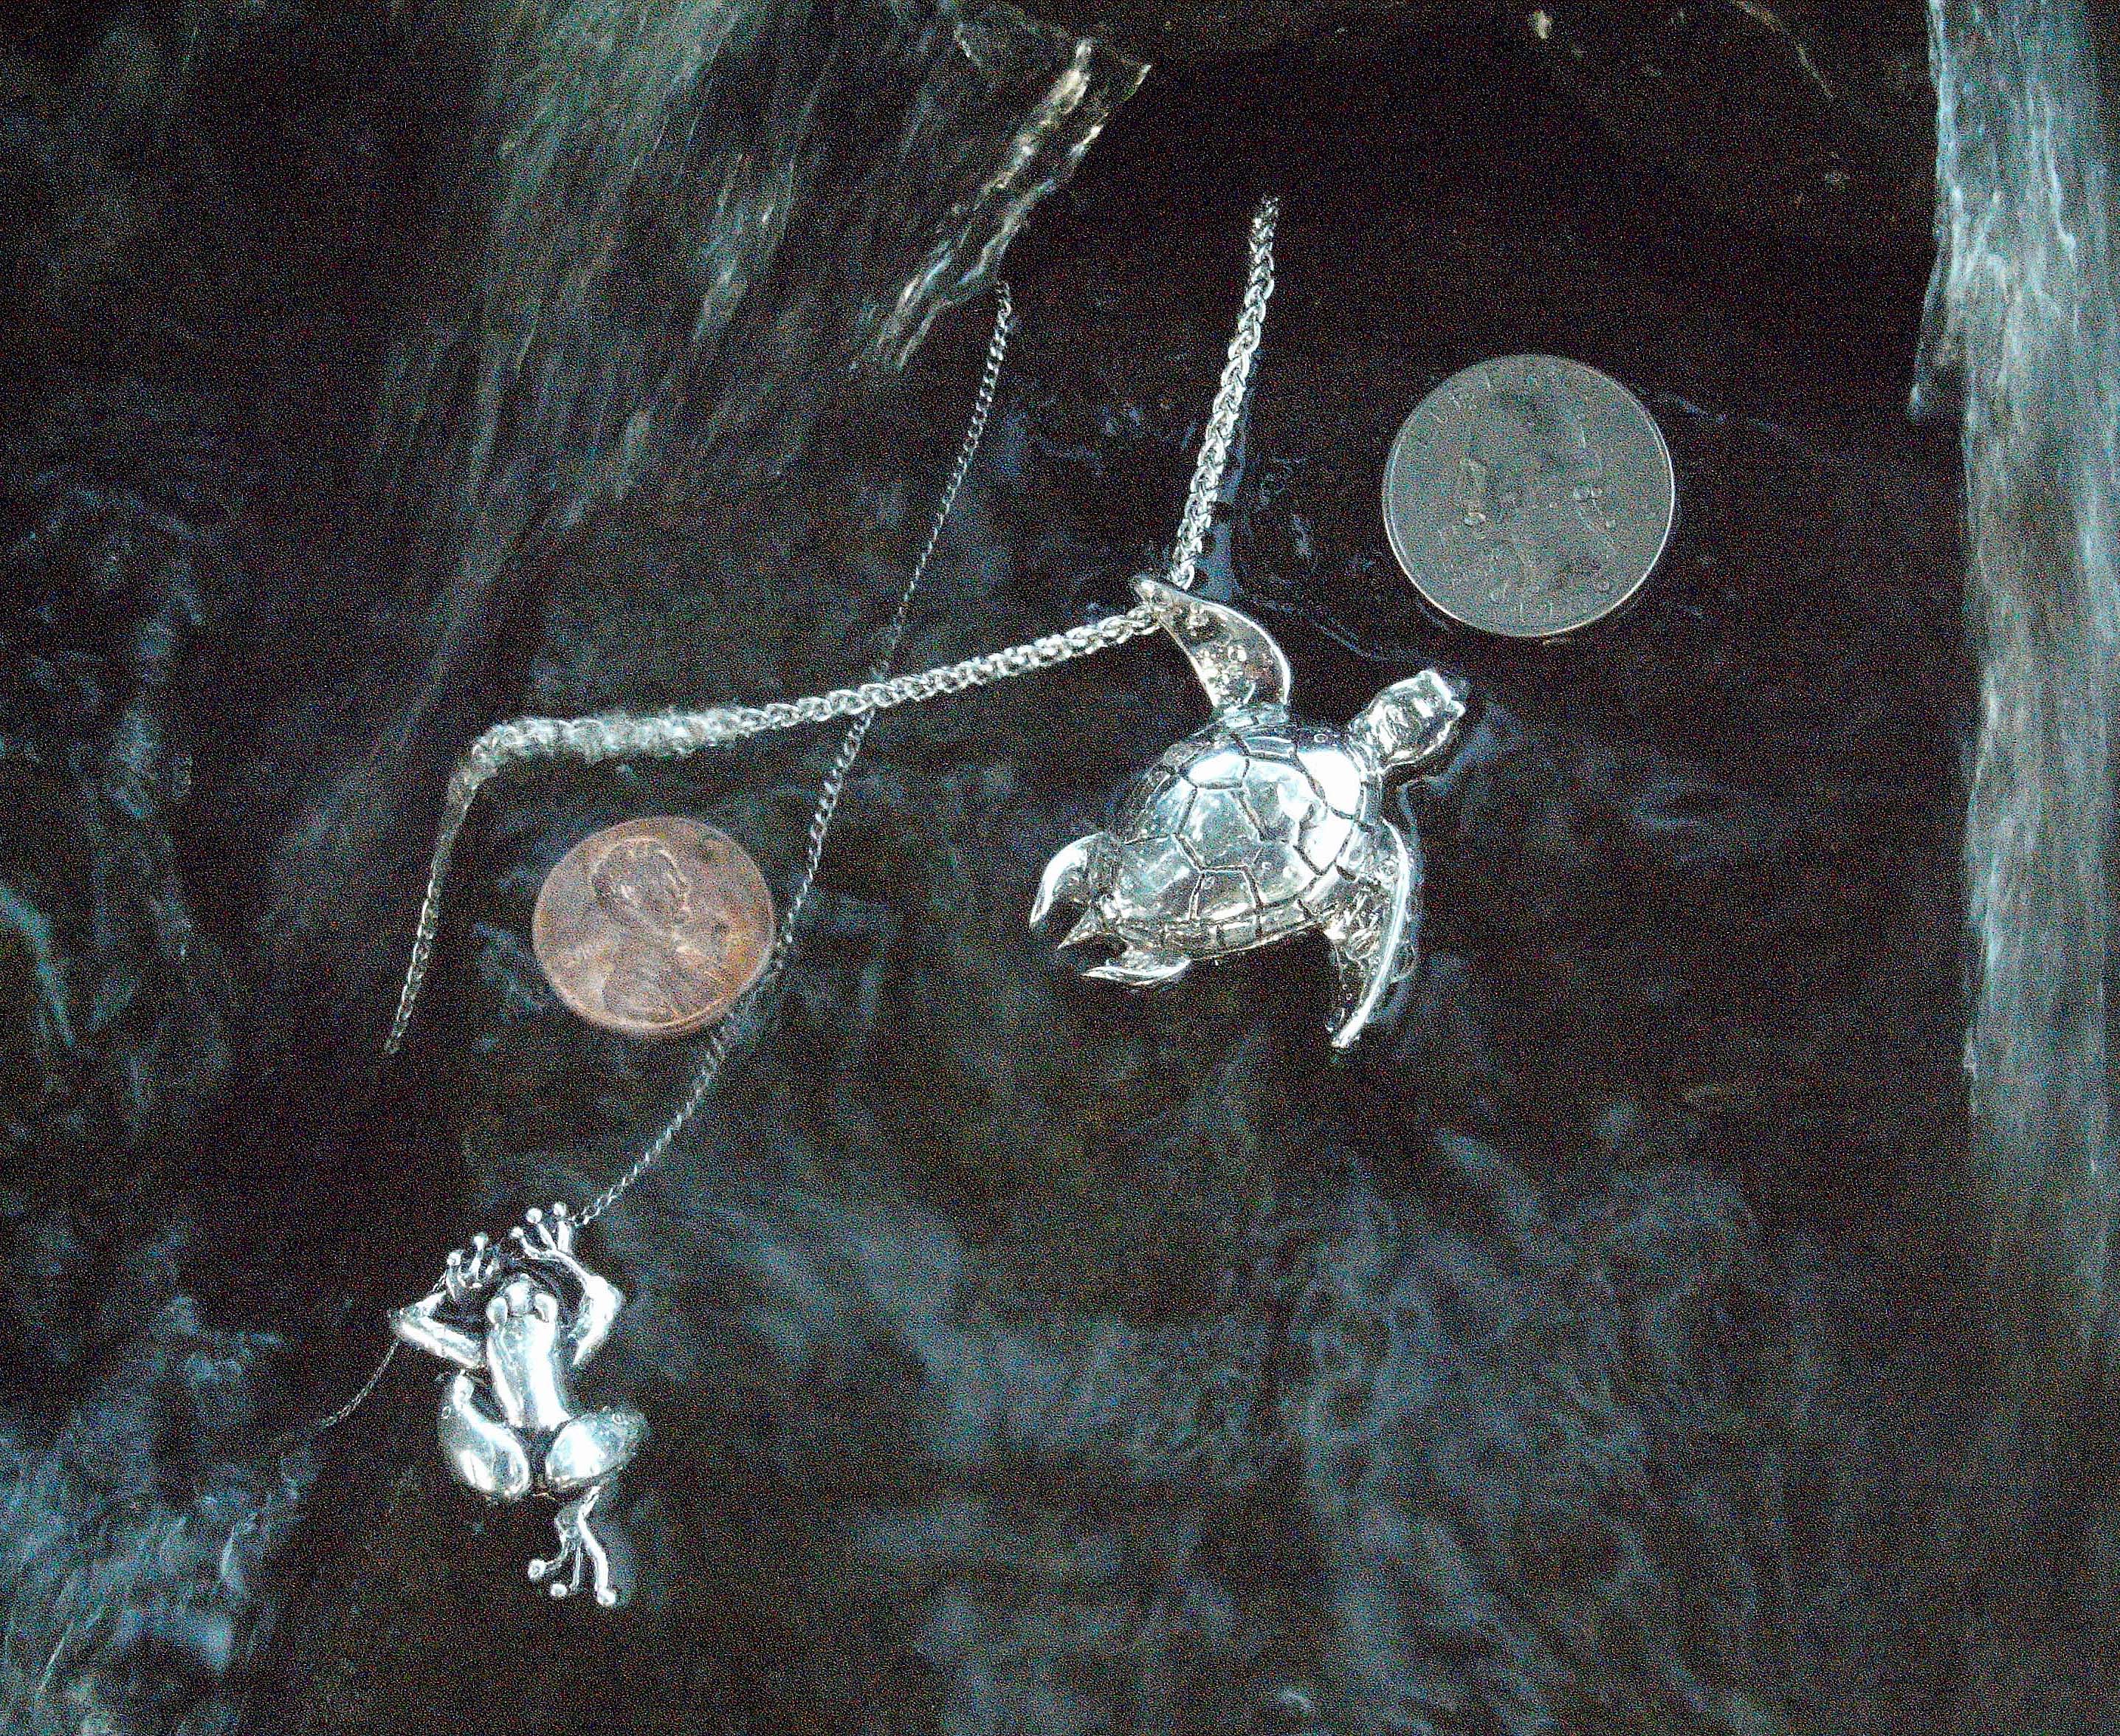 Silver_turtle_and_frog_jewelery_in_waterfall